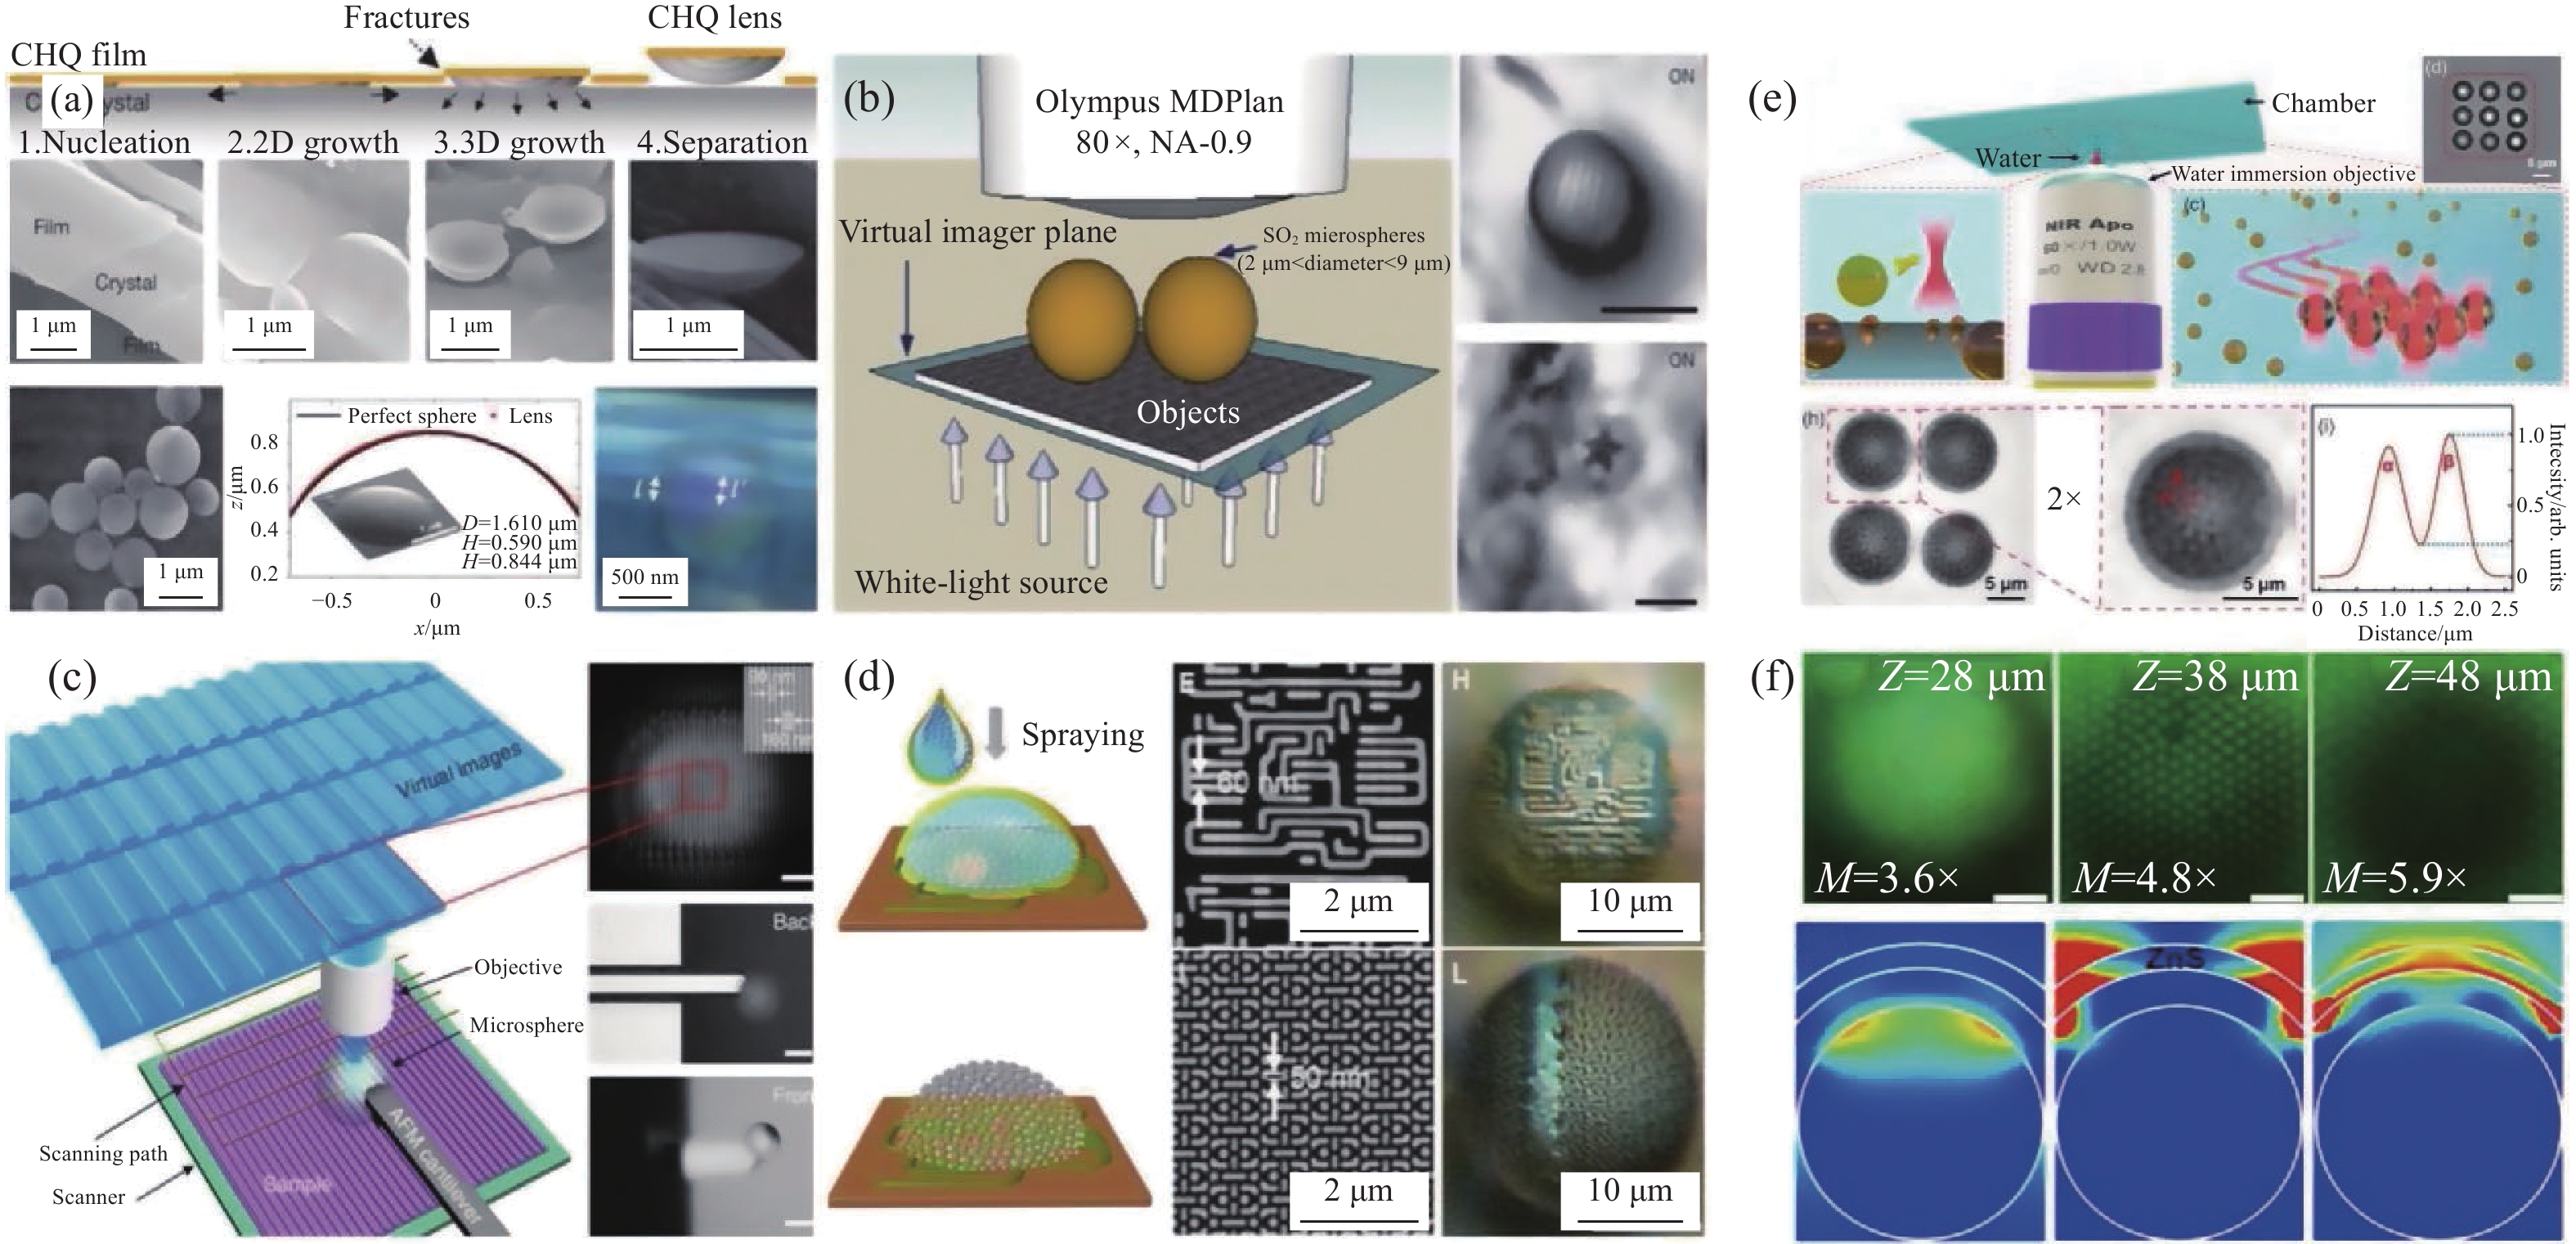 (a) CHQ microlens-assisted super-resolution microscopy[19]; (b) SiO2 microsphere-assisted super-resolution microscopy[20]; (c) Scanning microsphere super-resolution microscopy[26]; (d) Self-assembled TiO2 particles for super-resolution microscopy[30]; (e) Liquid droplet-assisted super-resolution microscopy[31]; (f) Surface plasmon resonance-enhanced super-resolution microscopy[39]